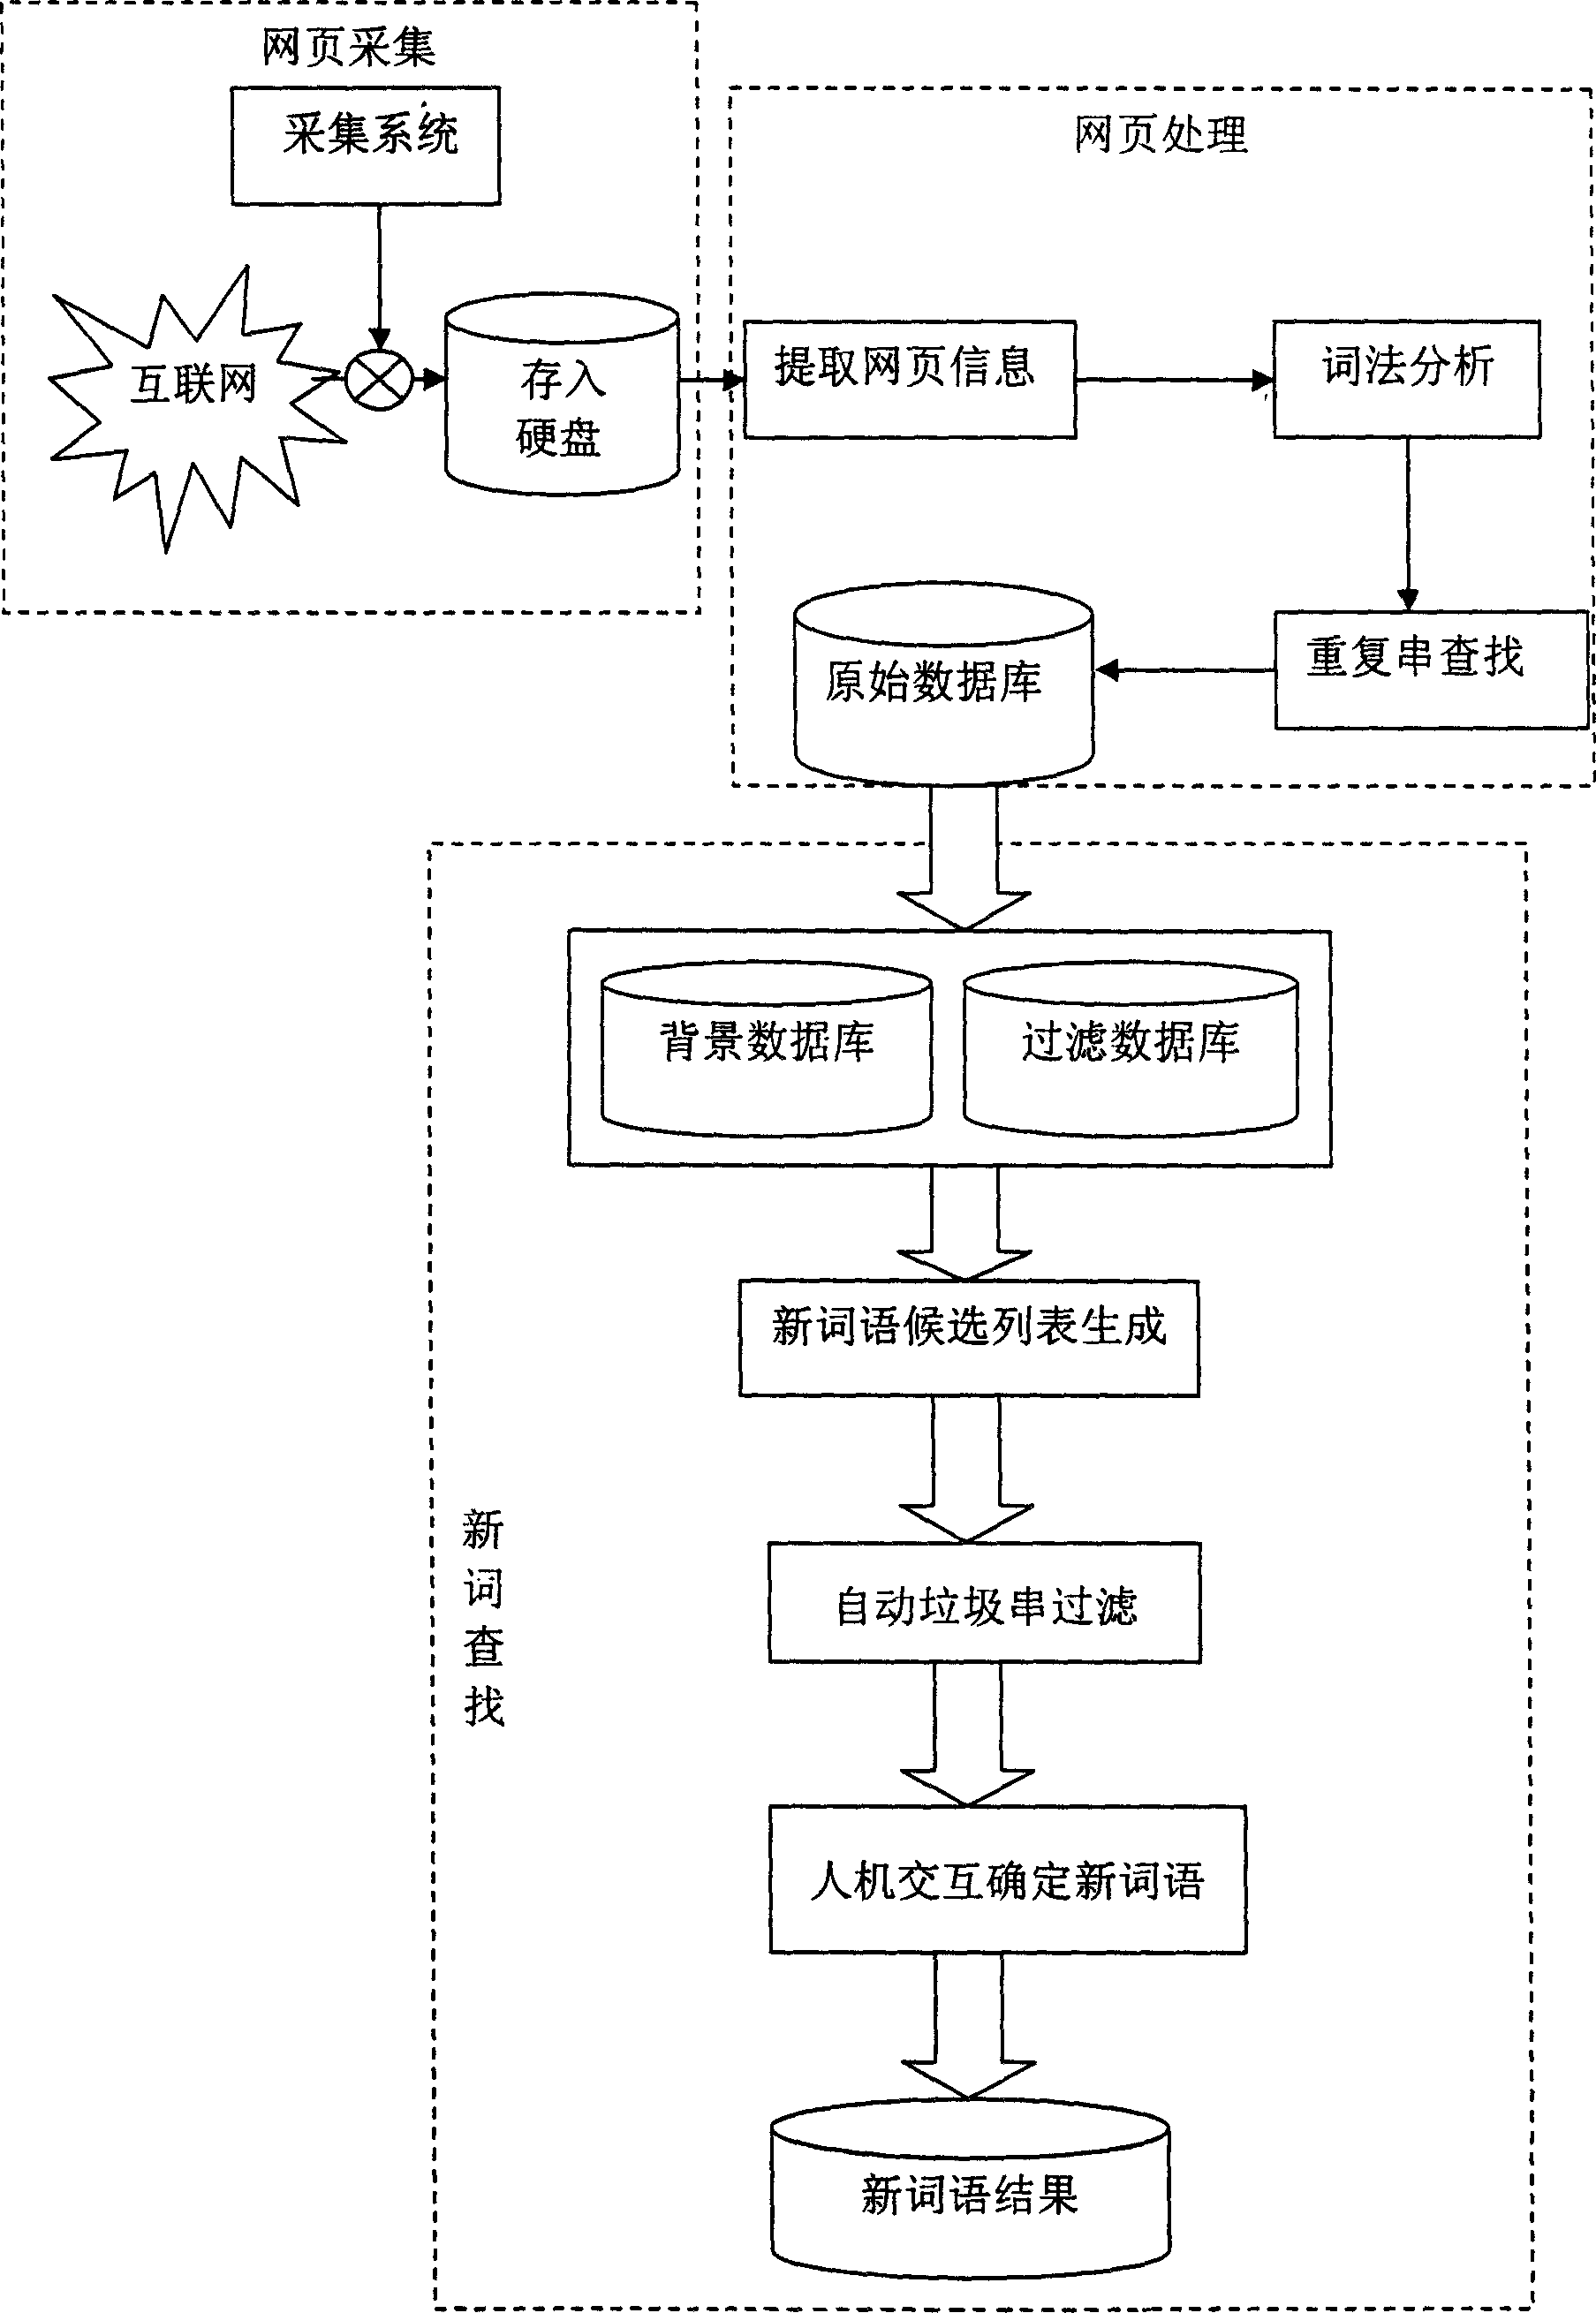 Chinese new word and expression detecting method and its detecting system